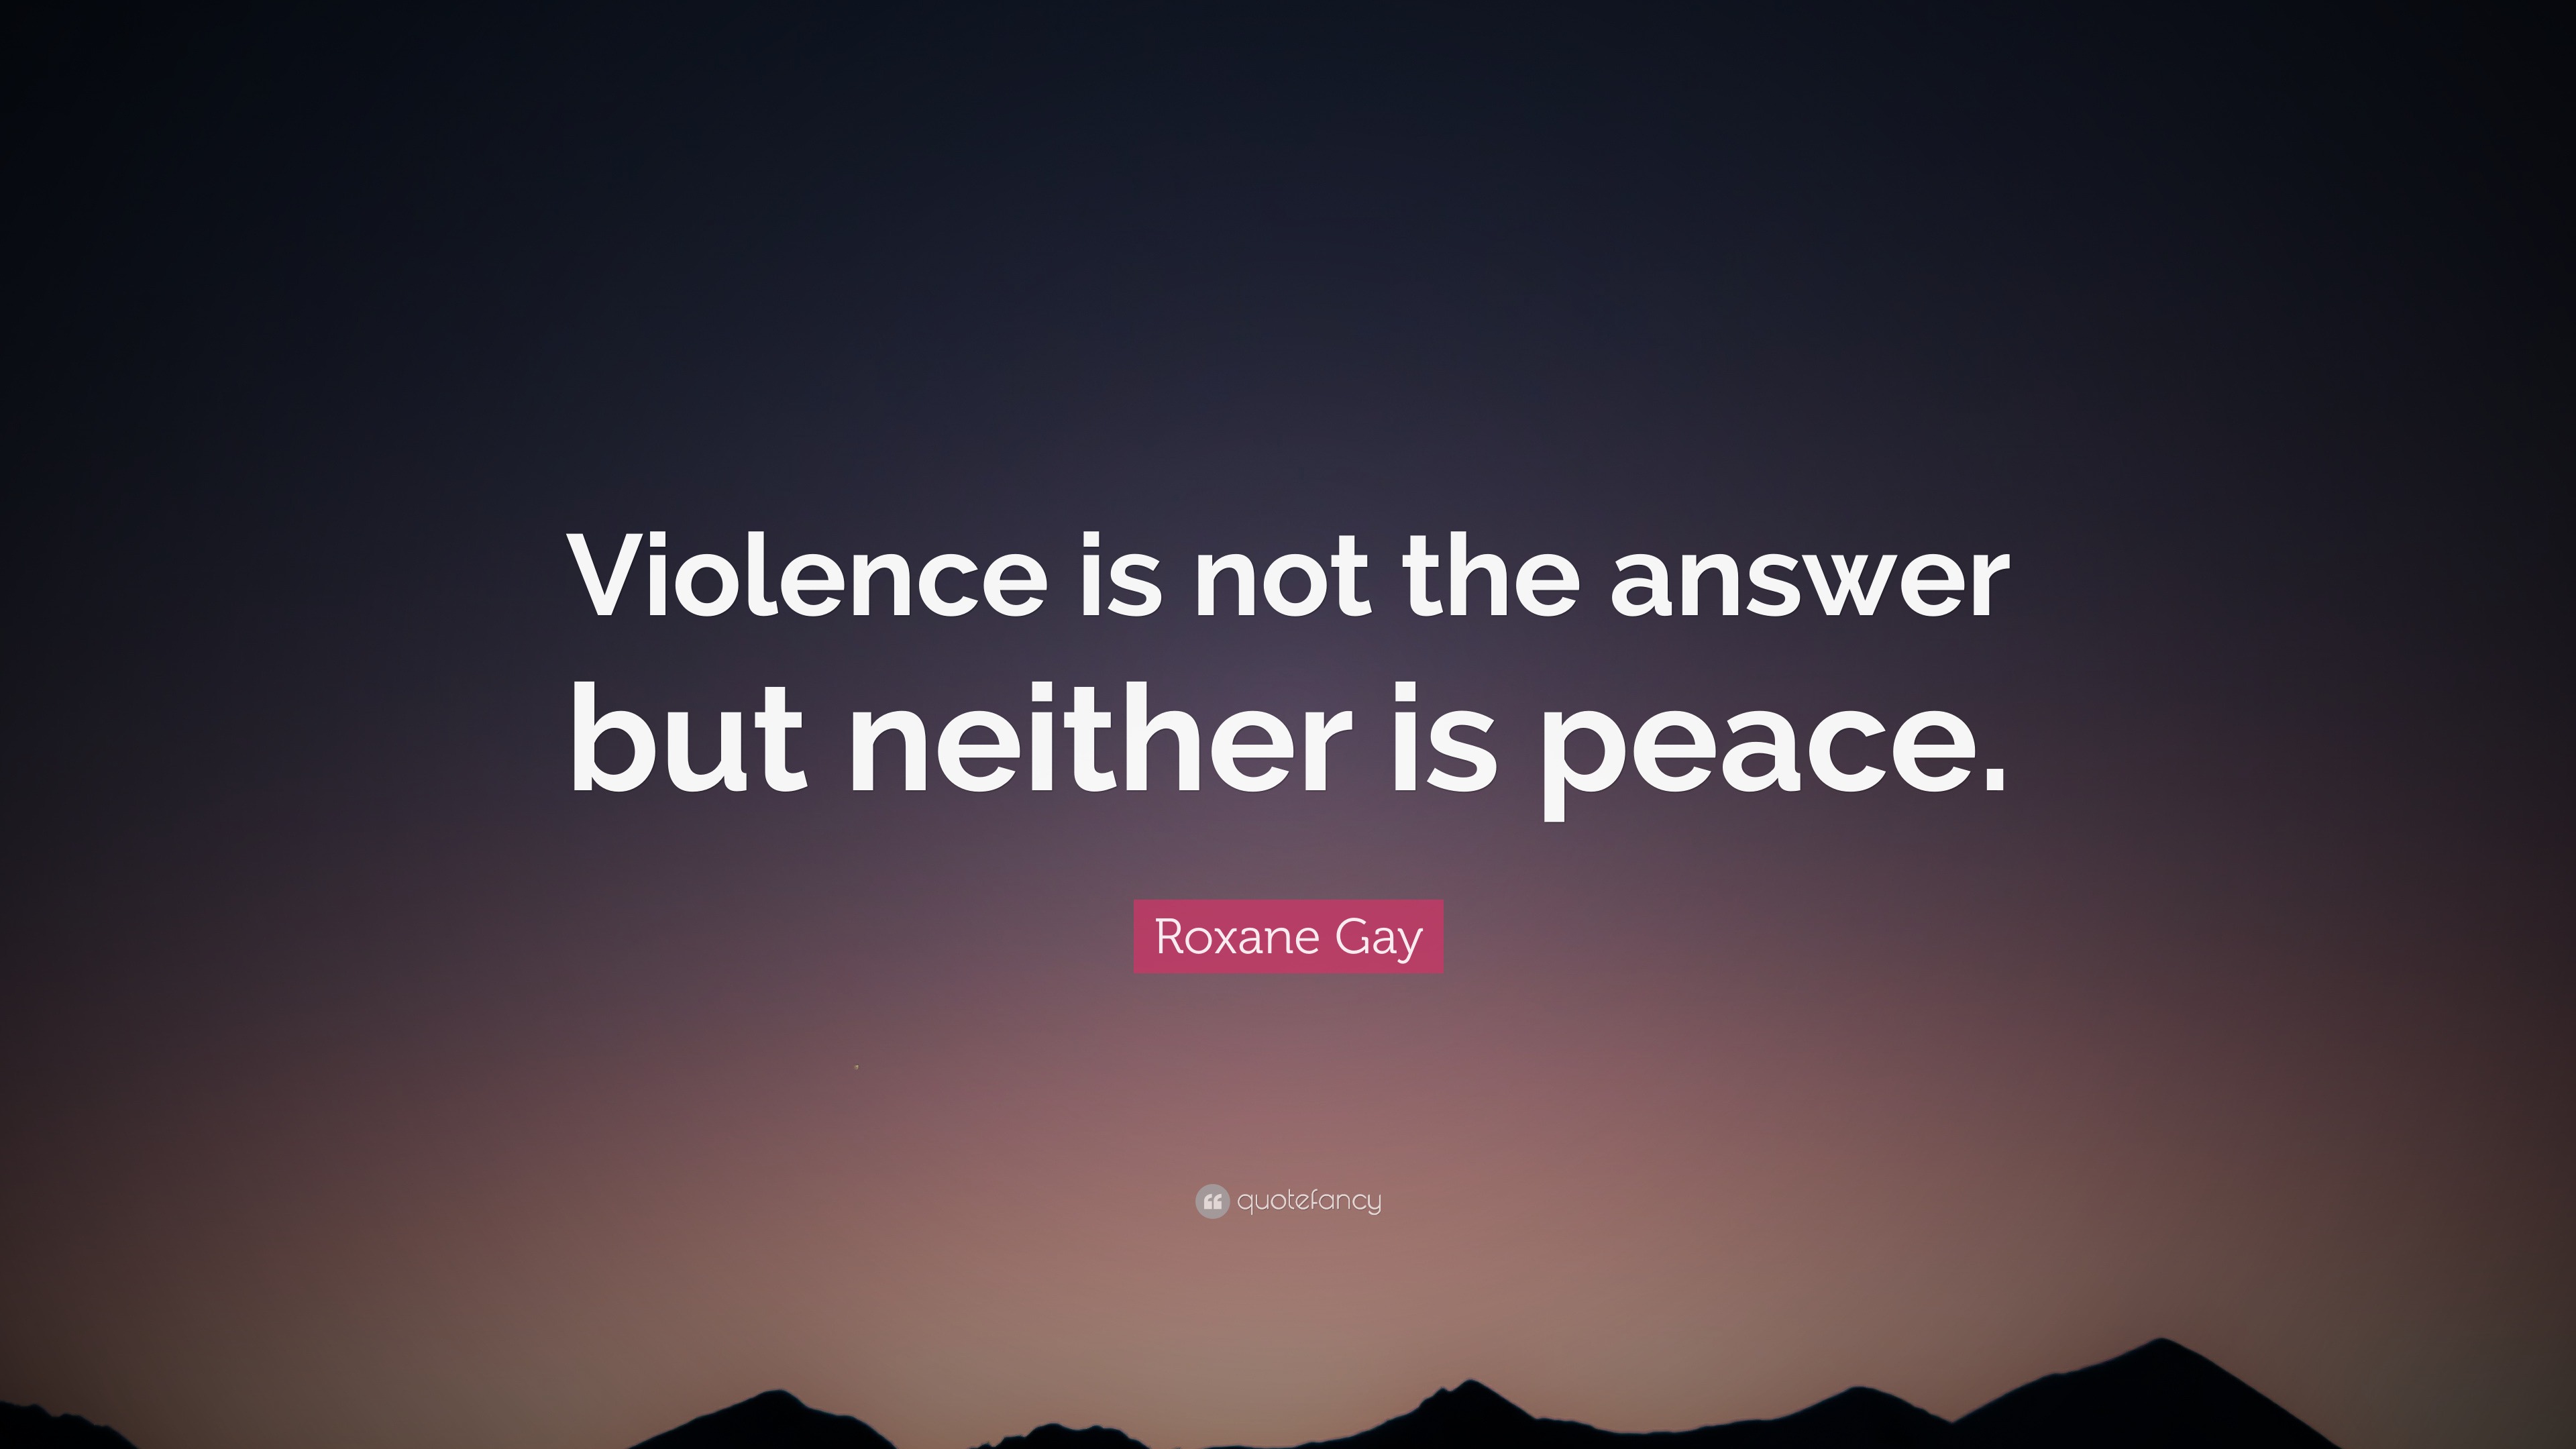 3013842-Roxane-Gay-Quote-Violence-is-not-the-answer-but-neither-is-peace.jpg